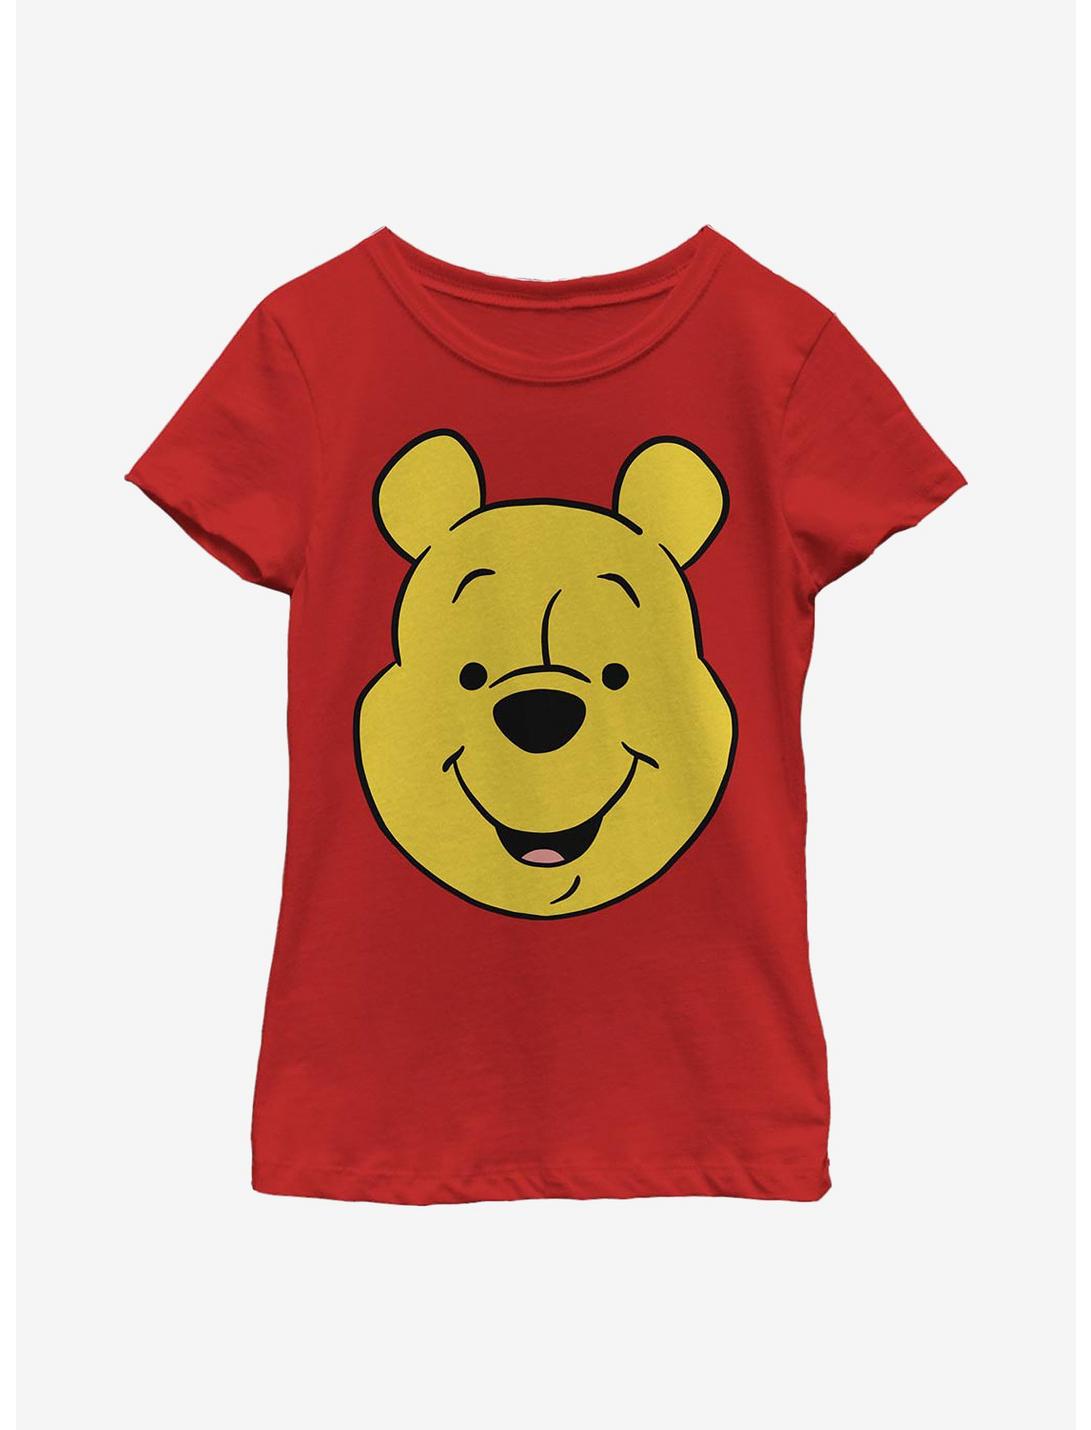 Disney Winnie The Pooh Big Face Youth Girls T-Shirt, RED, hi-res